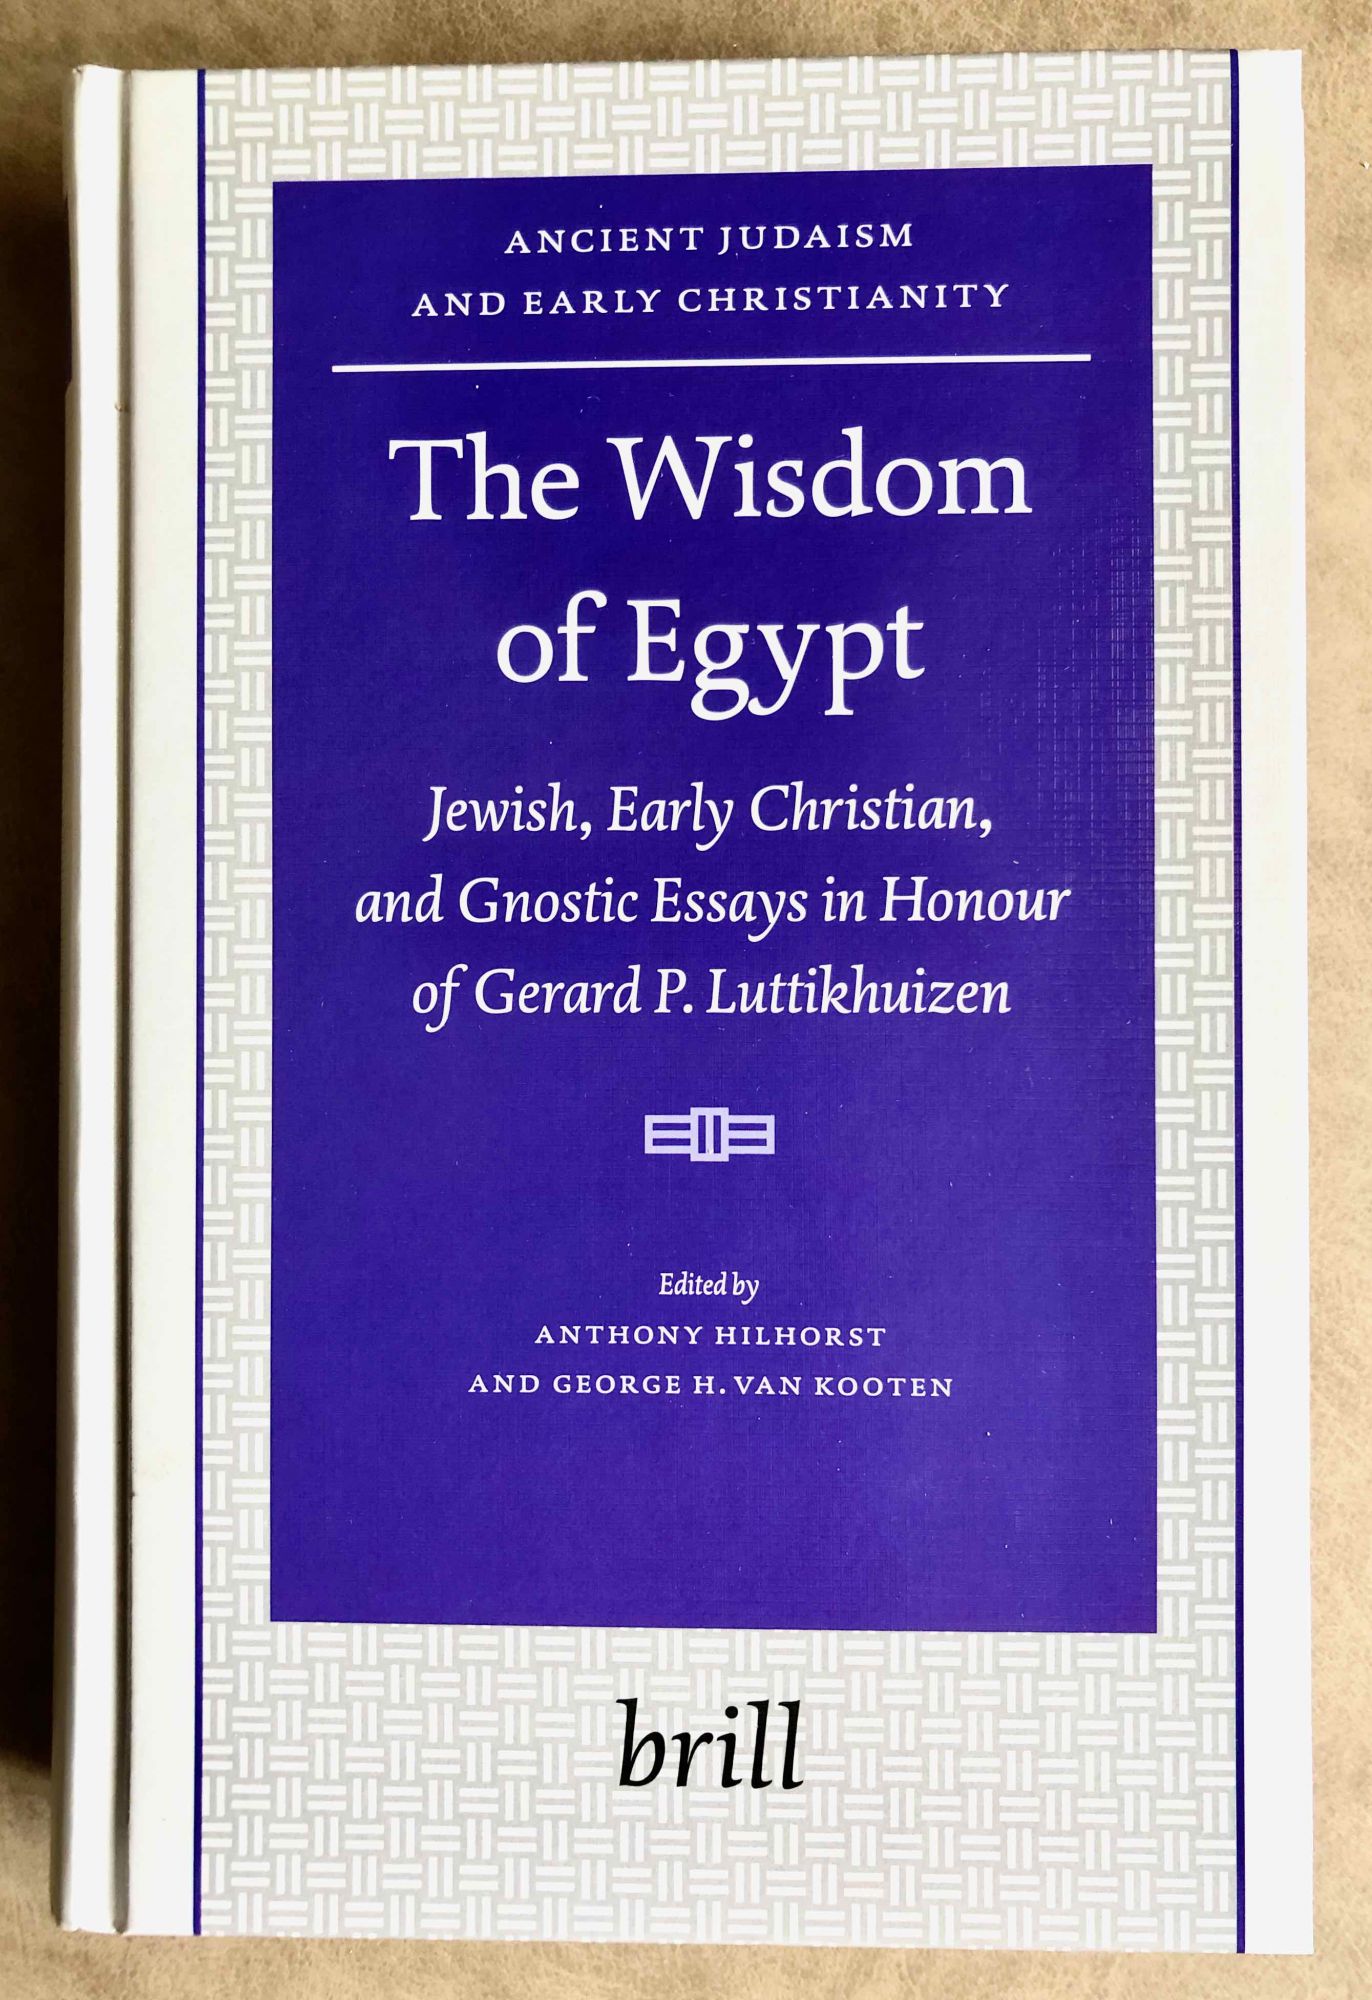 Ancient Judaism and Early Christianity. The Wisdom of Egypt. Jewish, Early Christian, and Gnostic Essays in Honour of Gerard P. Luttikhuizen - LUTTIKHUIZEN Gerard (in honorem) - HILHORST Anthony - VAN KOOTEN George H. (editors)